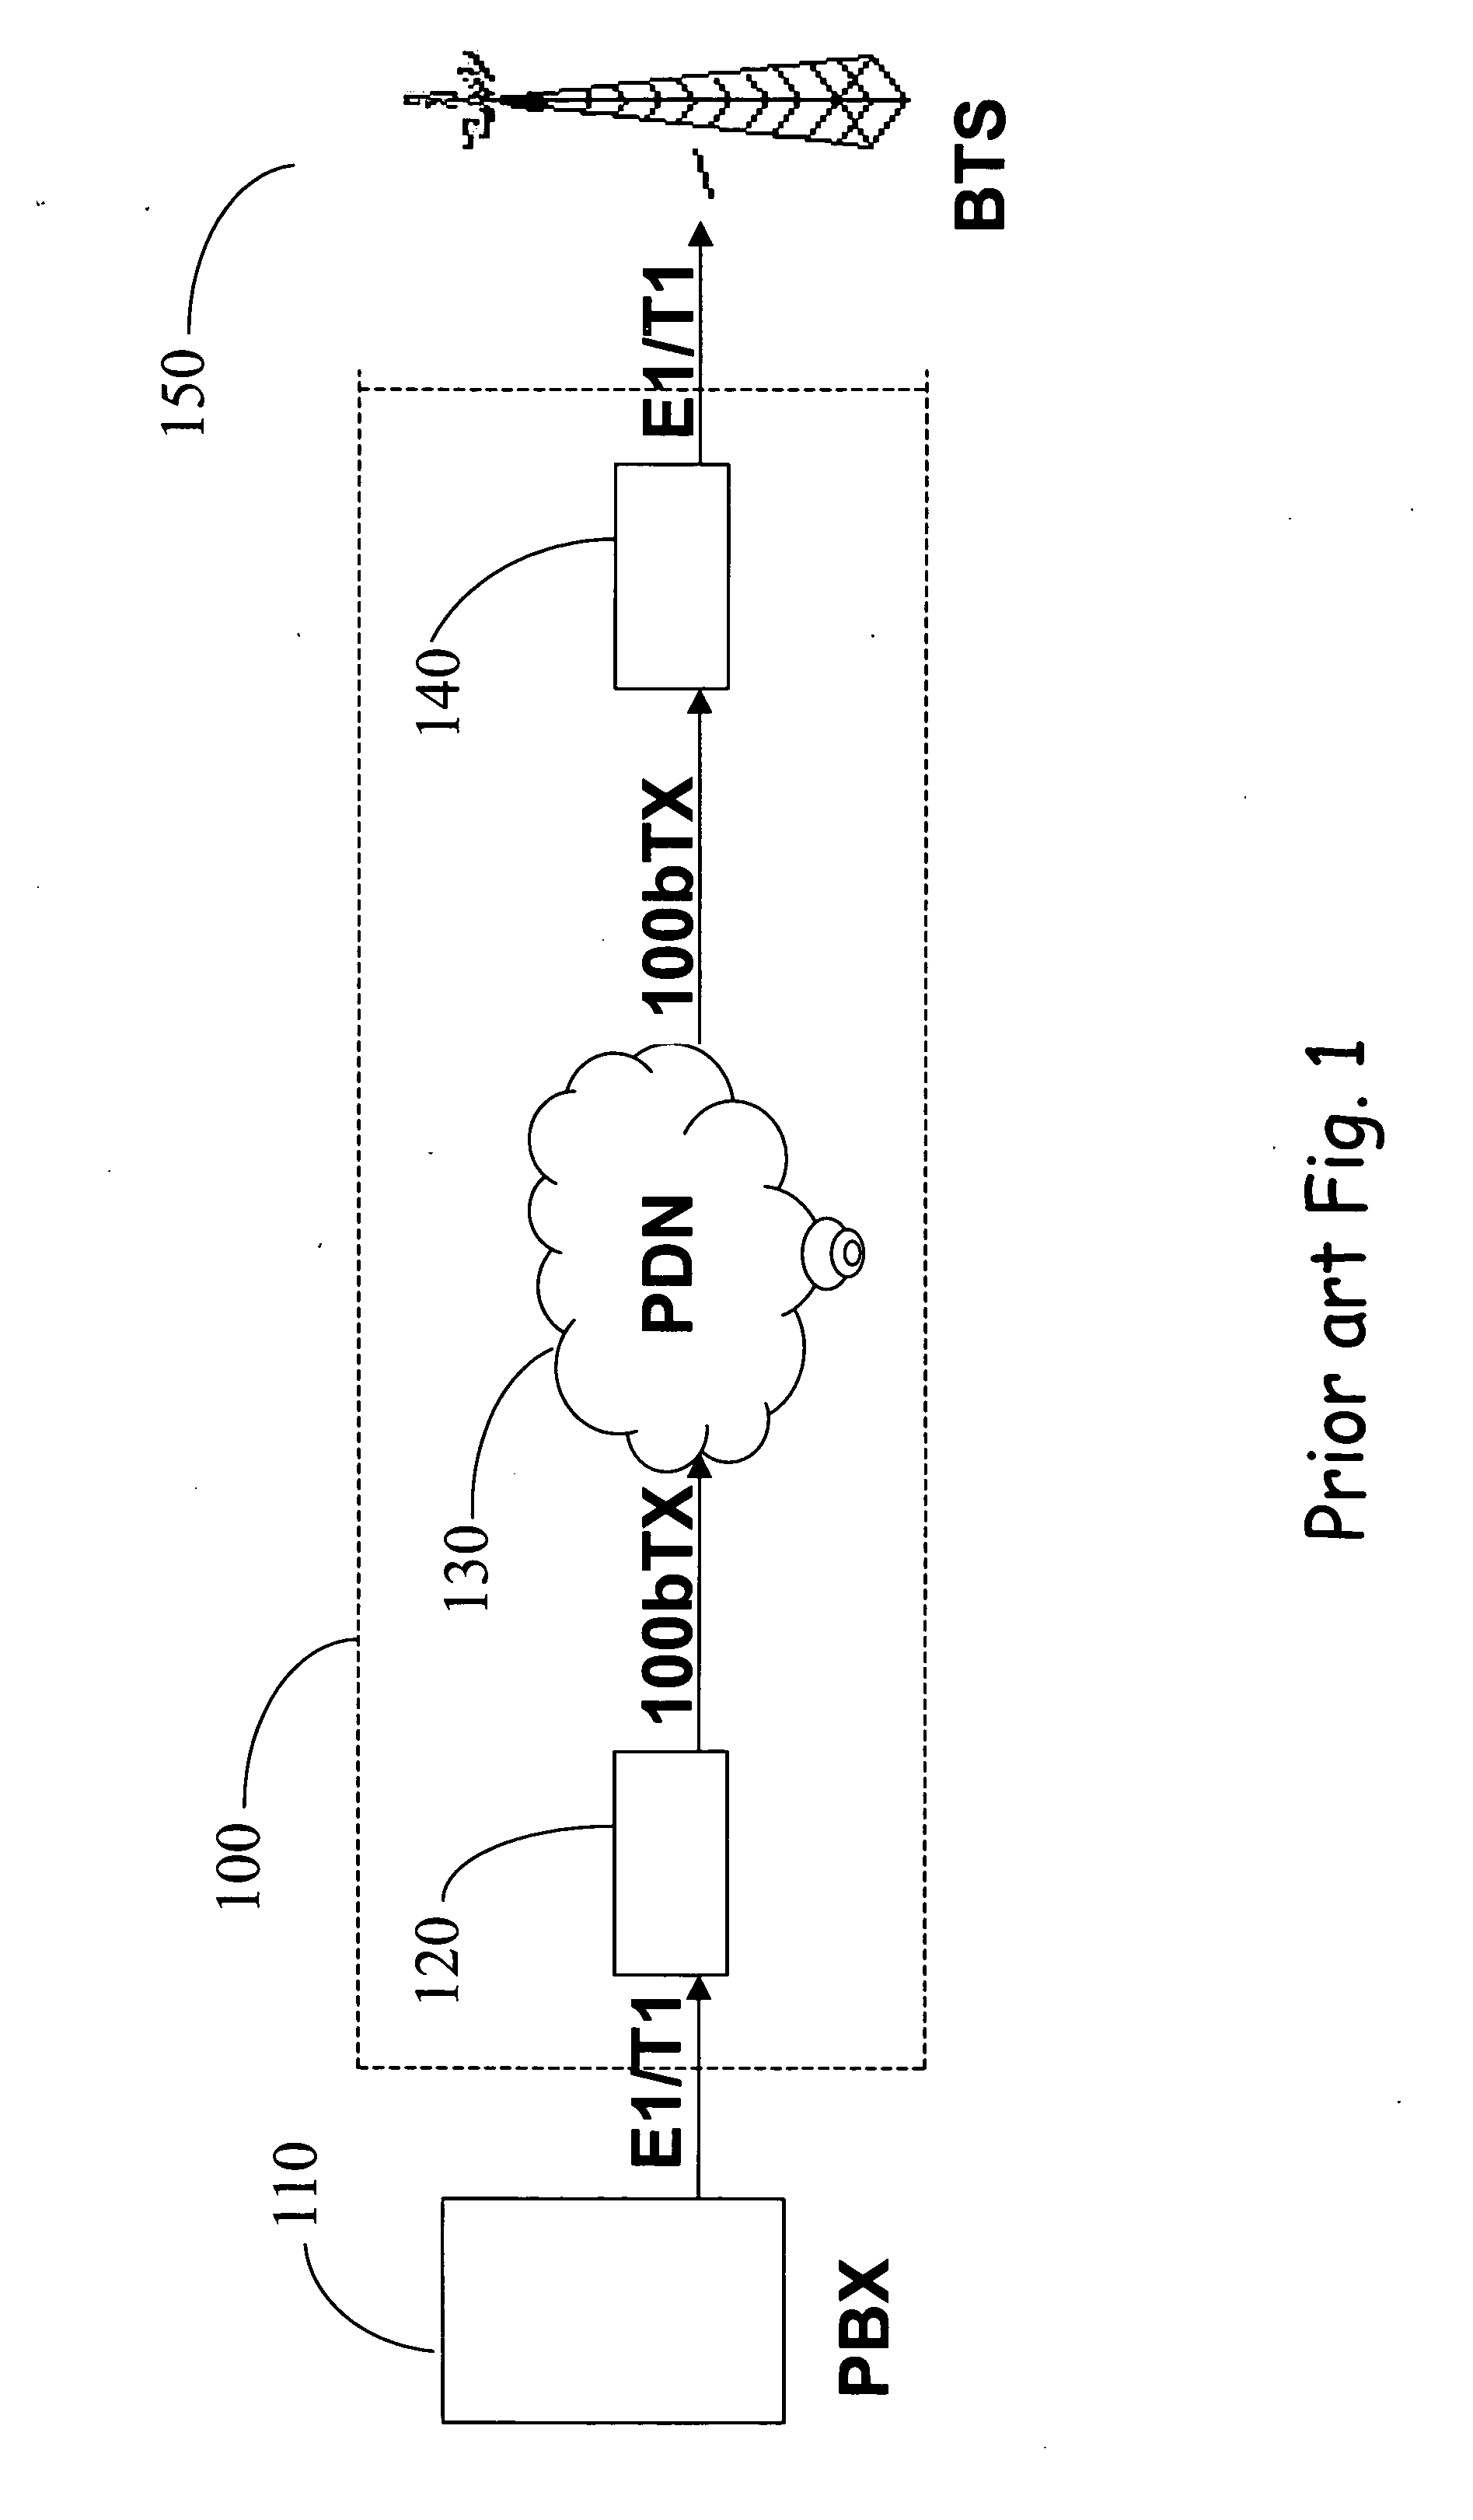 System and method for synchronizing serial digital interfaces over packet data networks